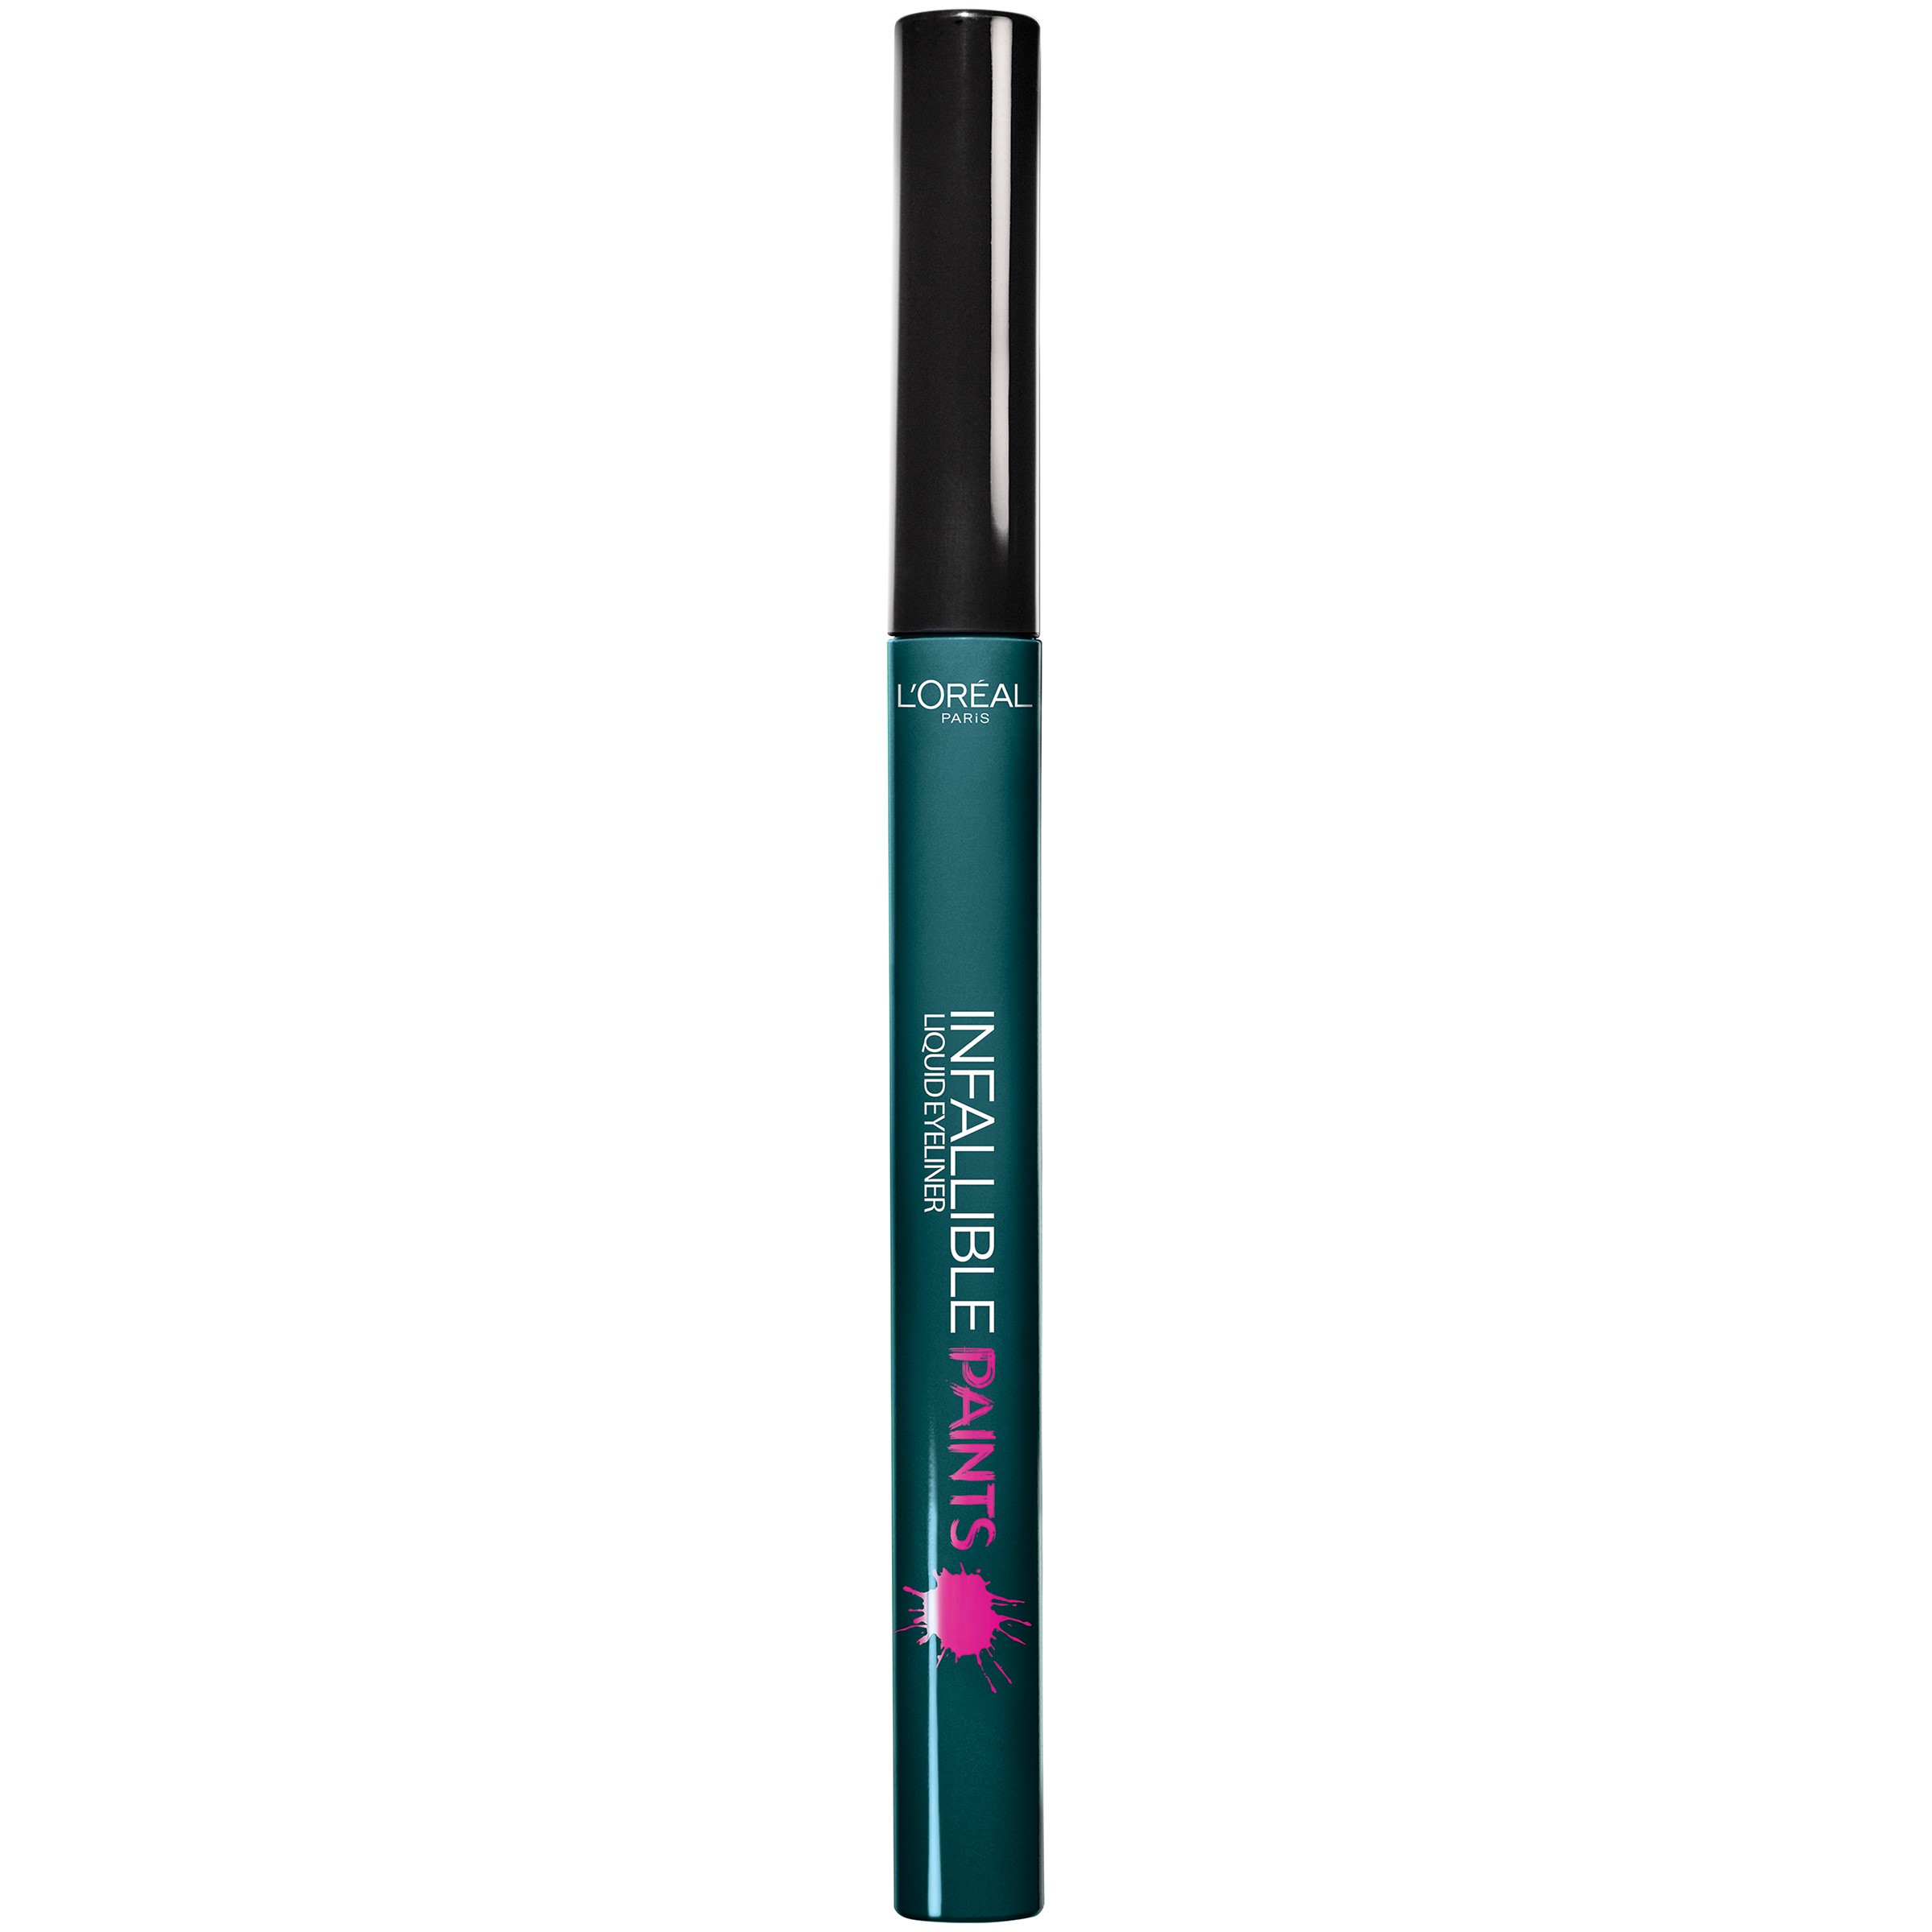 L'Oreal Paris Infallible Paints Eyeliner, Wild Green - image 1 of 7